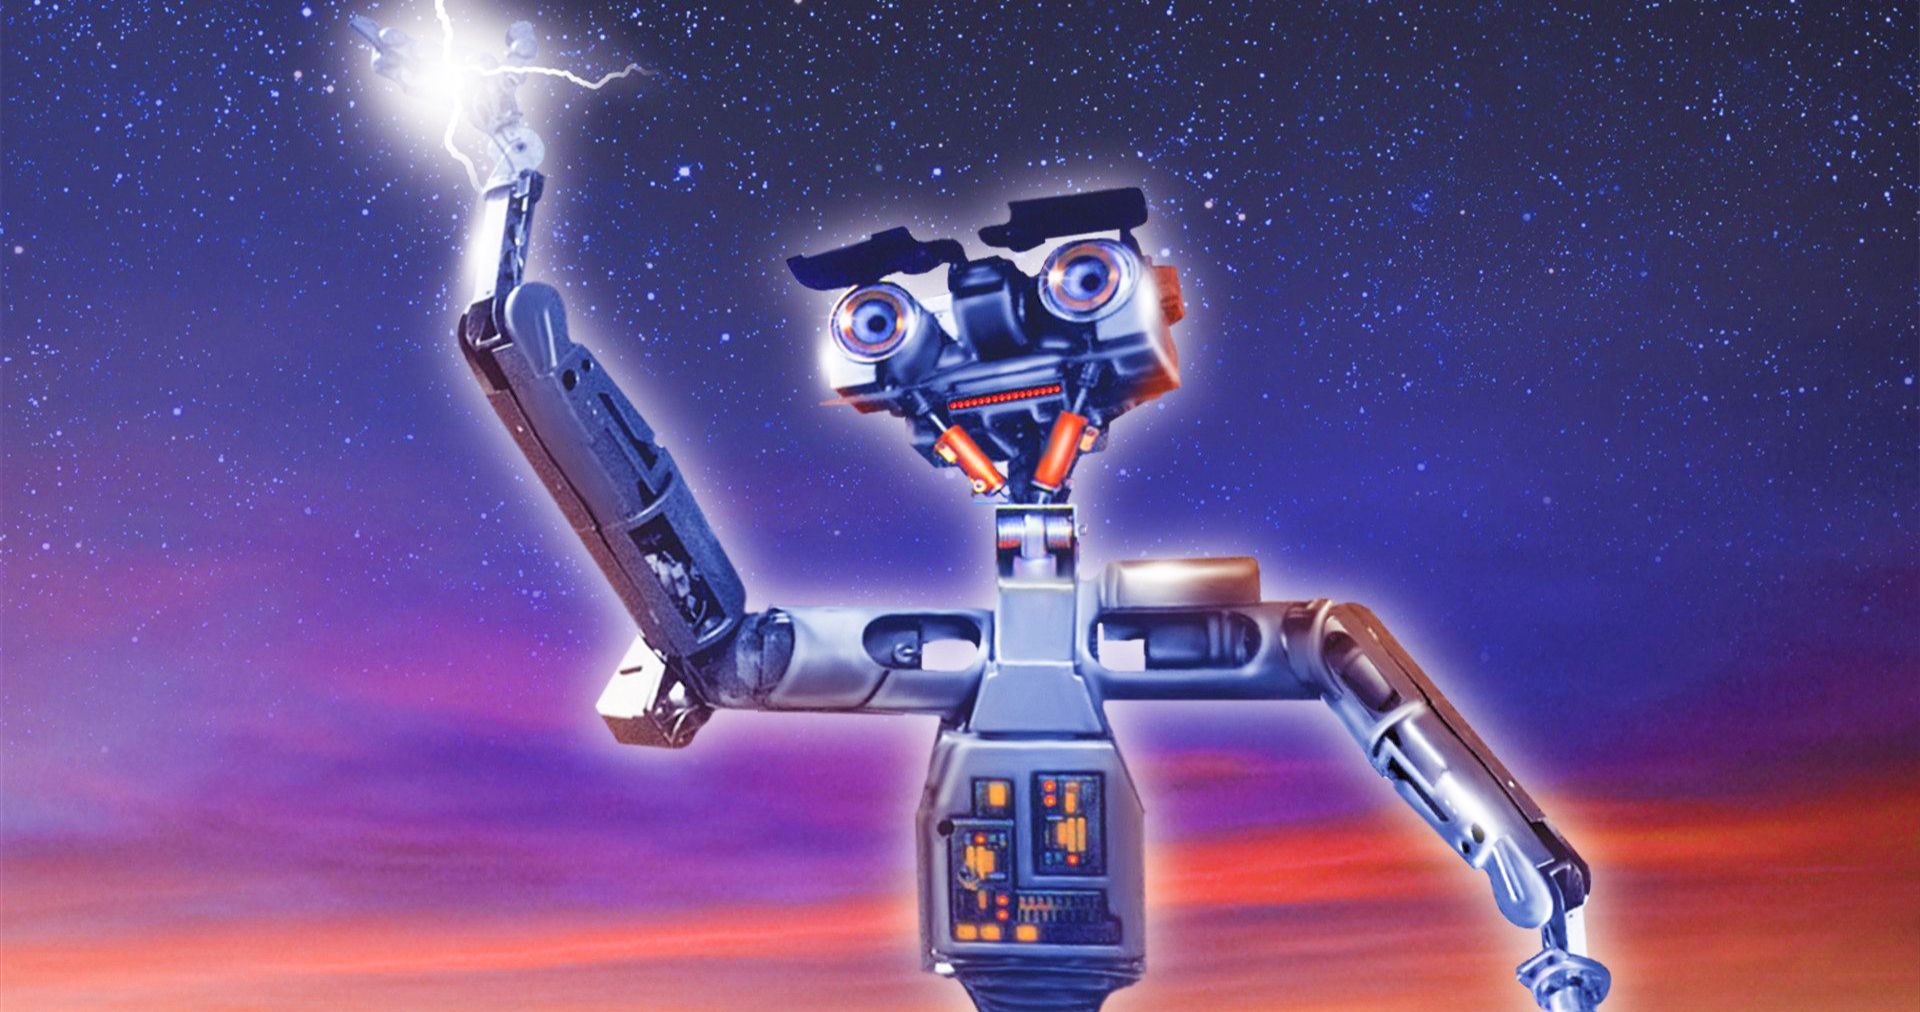 Short Circuit Reboot Is Happening with a Twist on the '80s Classic